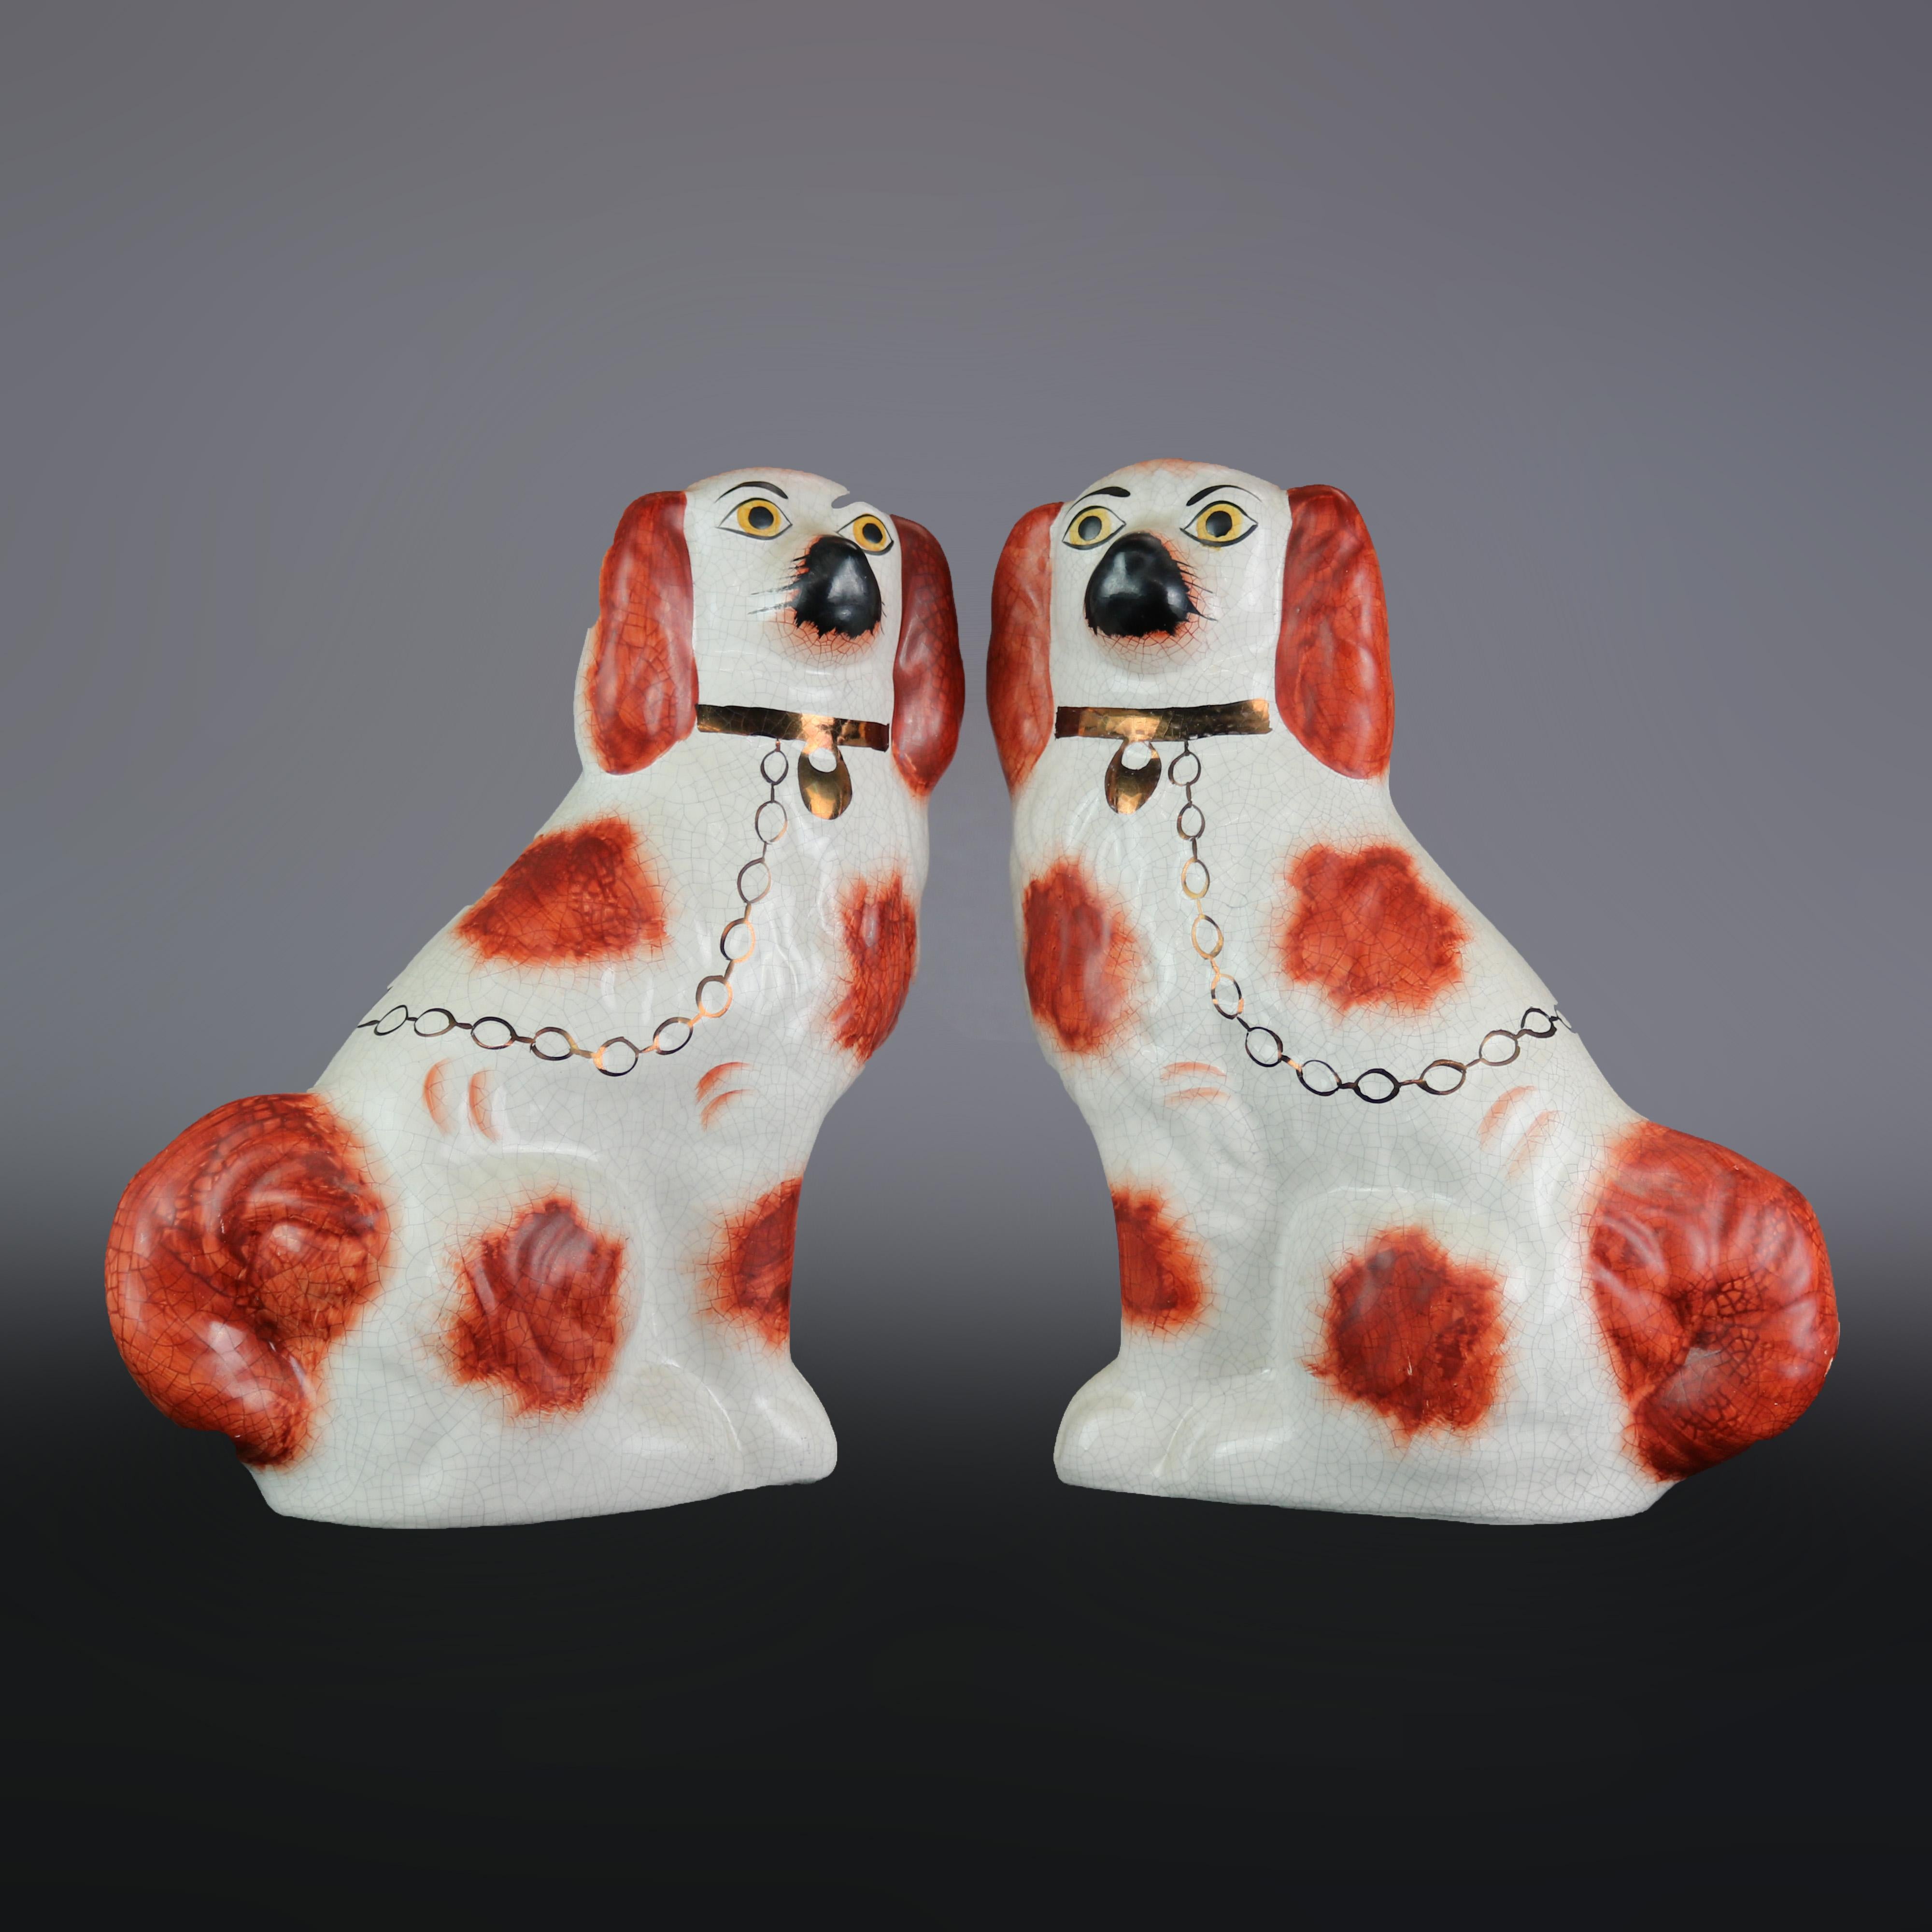 Porcelain Antique Pair of Large English Staffordshire Pottery Dogs, Spaniels, circa 1900